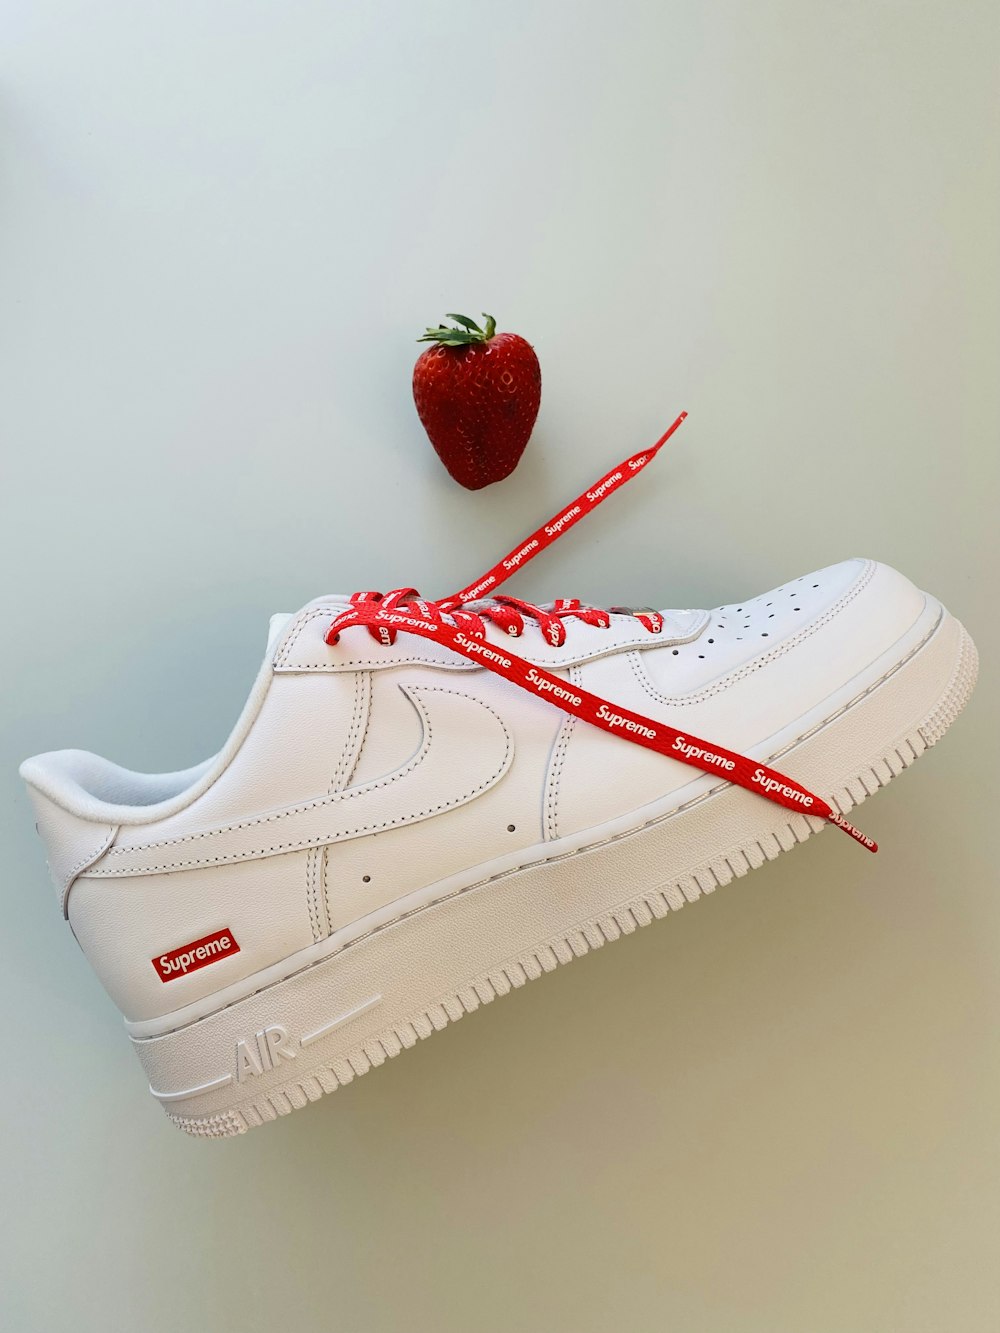 a pair of white sneakers tied to a strawberry